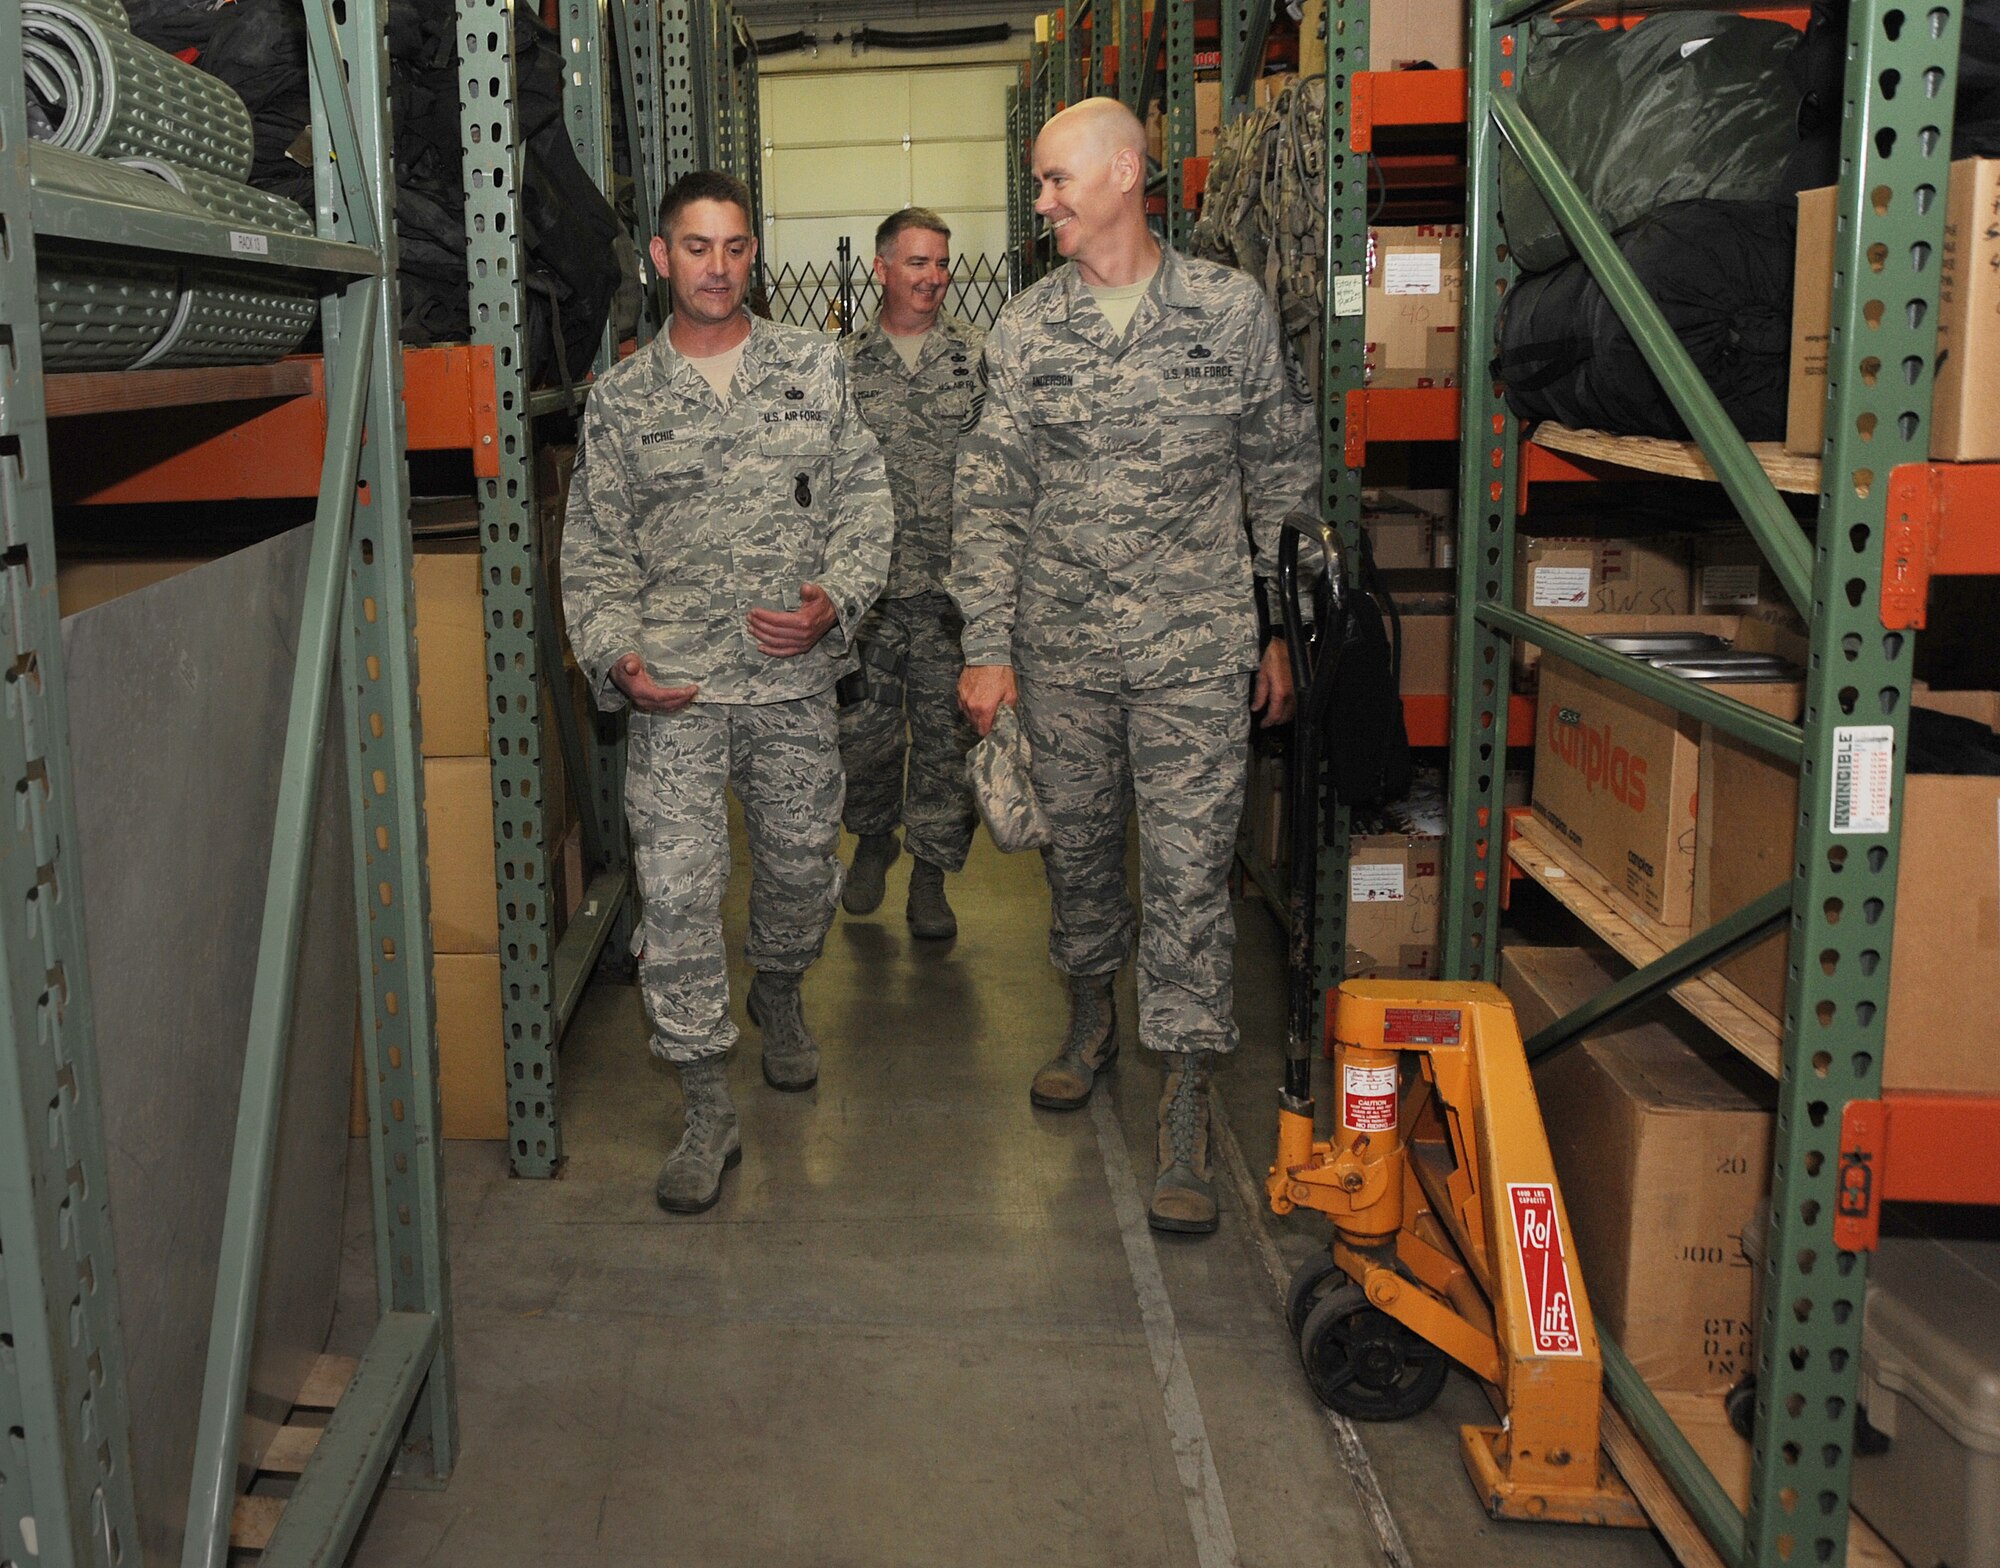 Staff Sgt. Matthew Ritchie, left, assigned to the 142nd Security Forces Squadron, walks Ronald C. Anderson Jr., Command Chief Master Sgt., 1st Air Force, right, thought the supply area used by the Security Forces Airmen during his visit to the Portland Air National Guard Base, Ore., June 10, 2014. (Air National Guard photo by Tech. Sgt. John Hughel, 142nd Fighter Wing Public Affairs/Released)